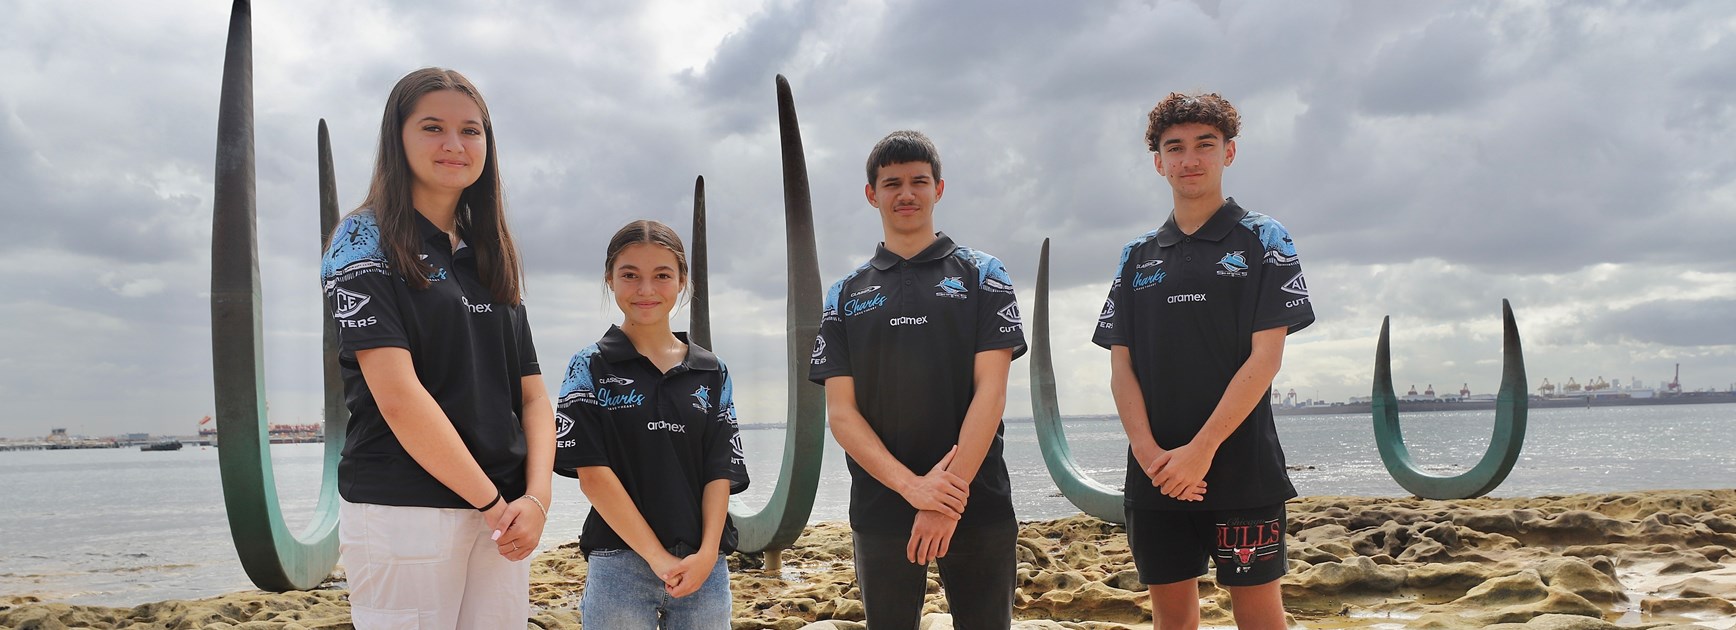 School to Work Sharks to represent at Indigenous Youth Summit